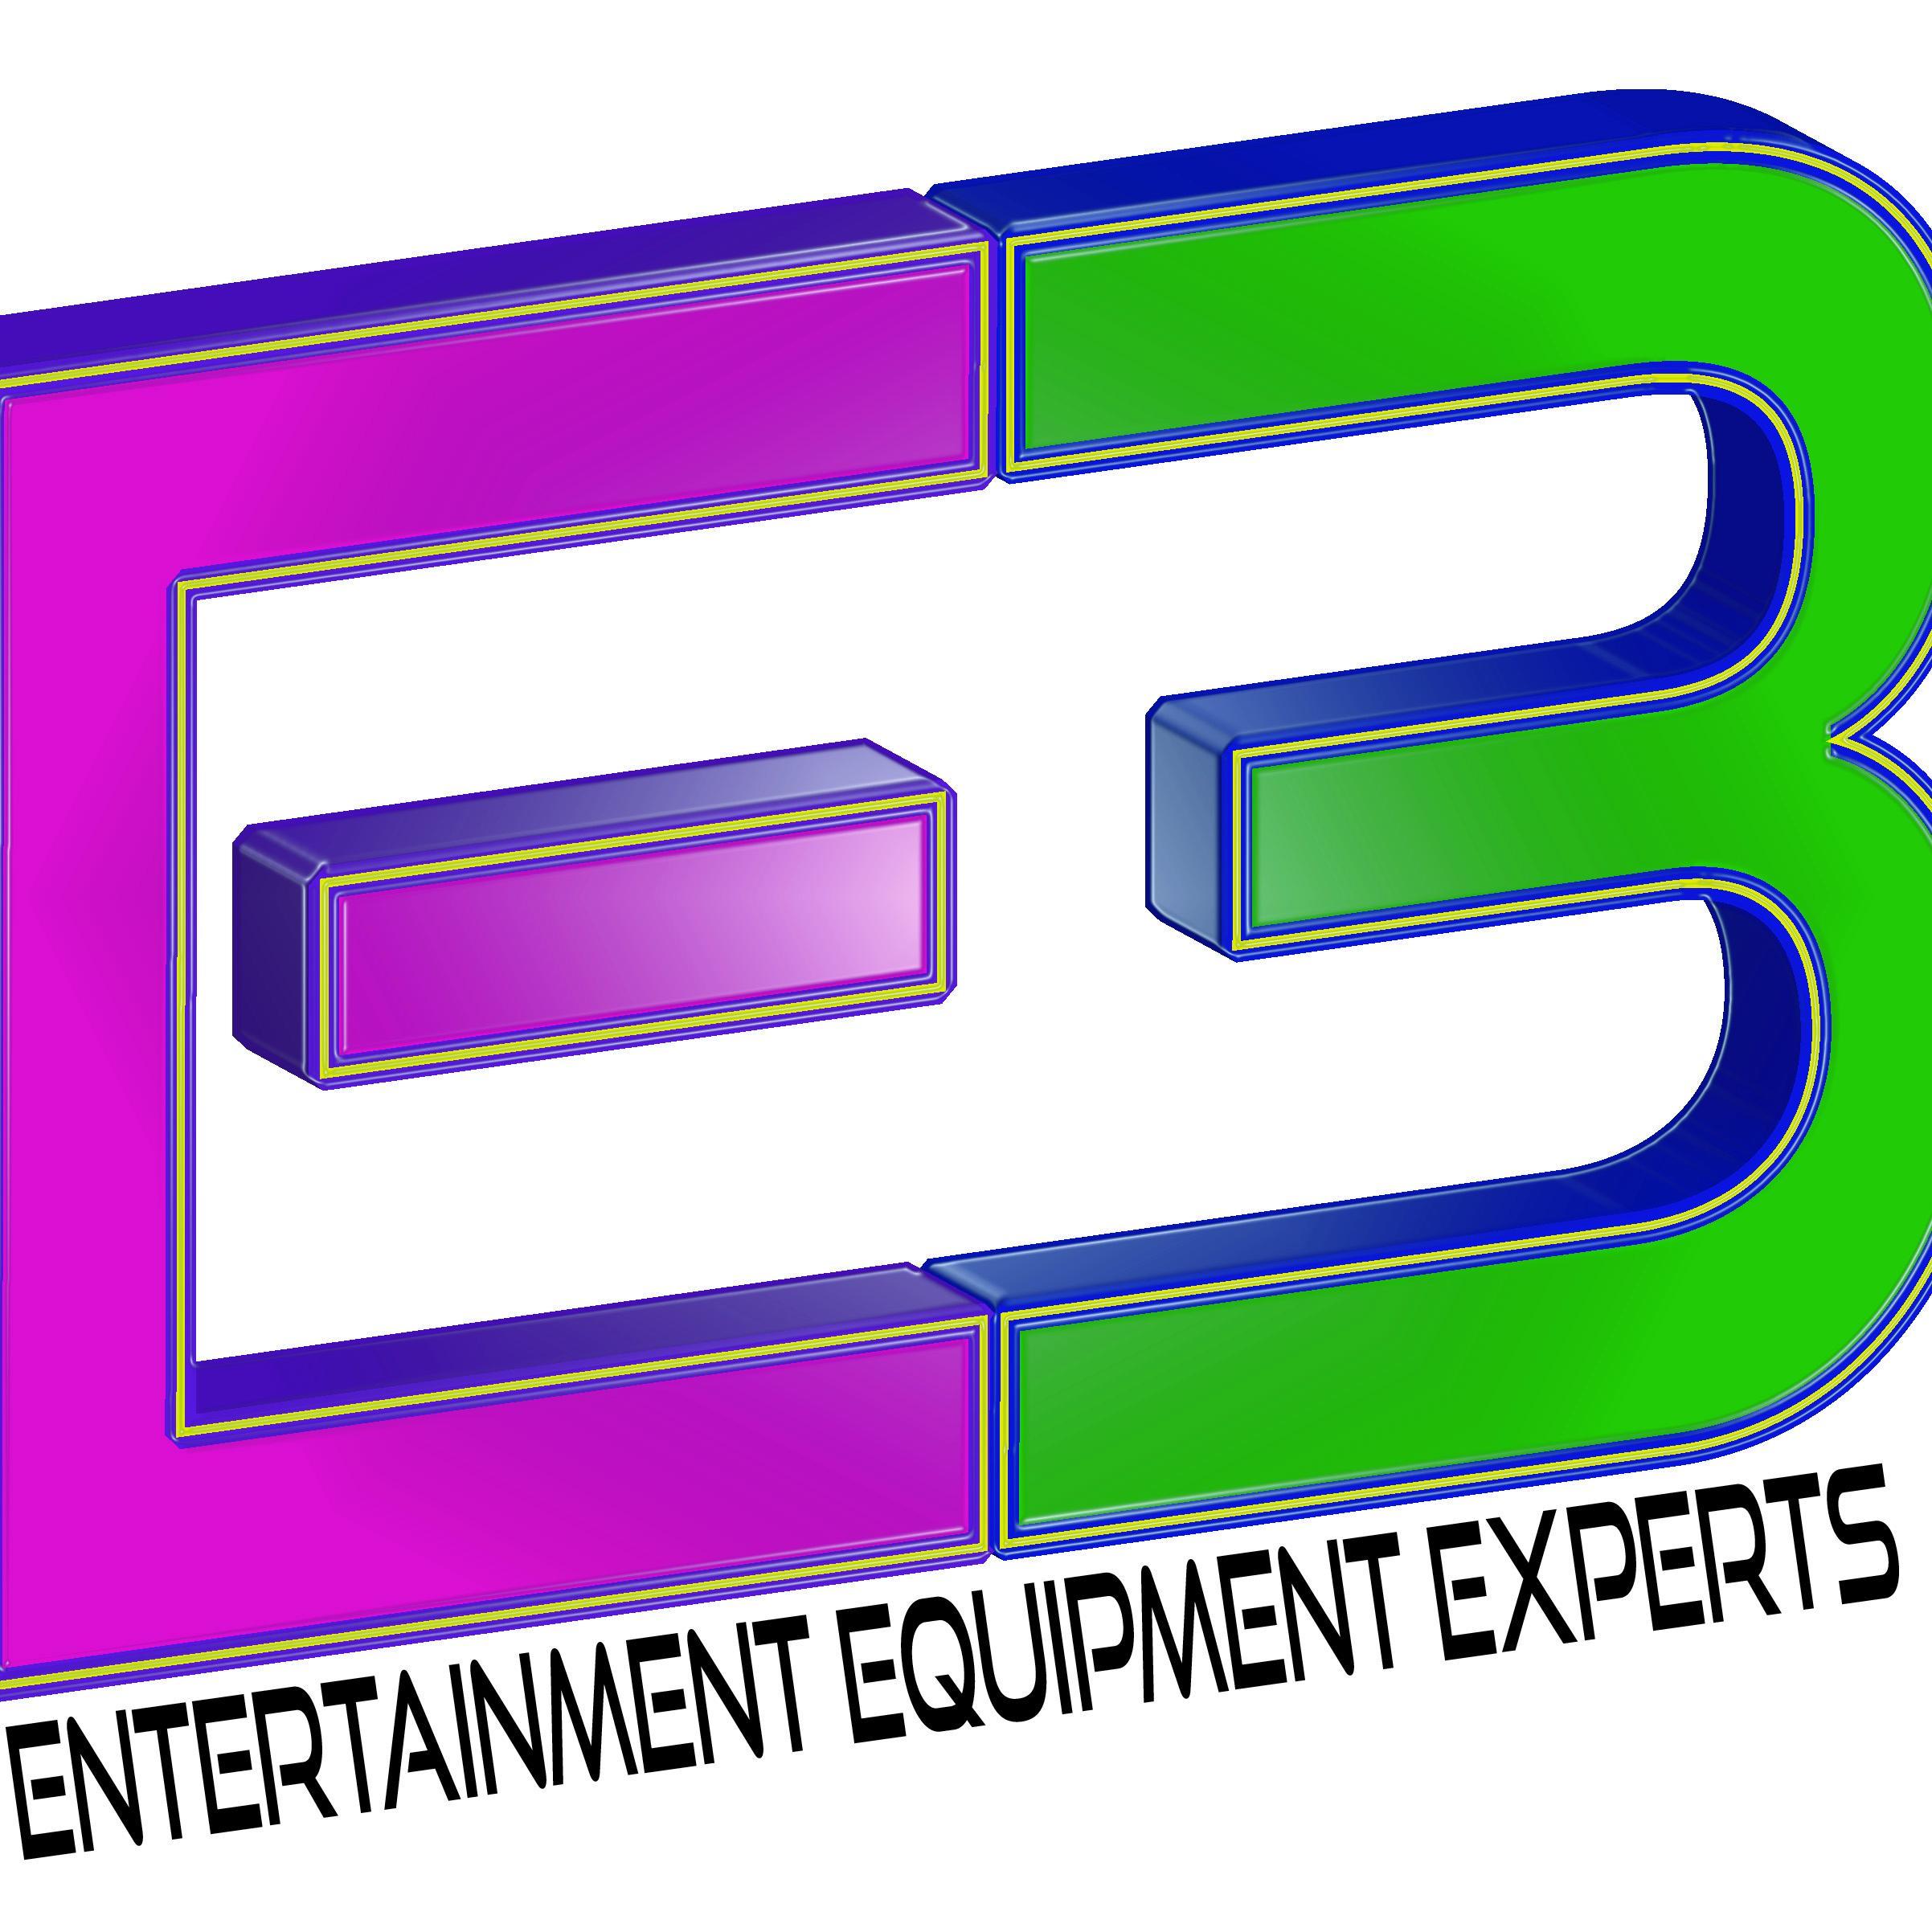 Entertainment Equipment Experts is a division of @AVSIllinois. We offer a full range of consulting services for entertainment centers.